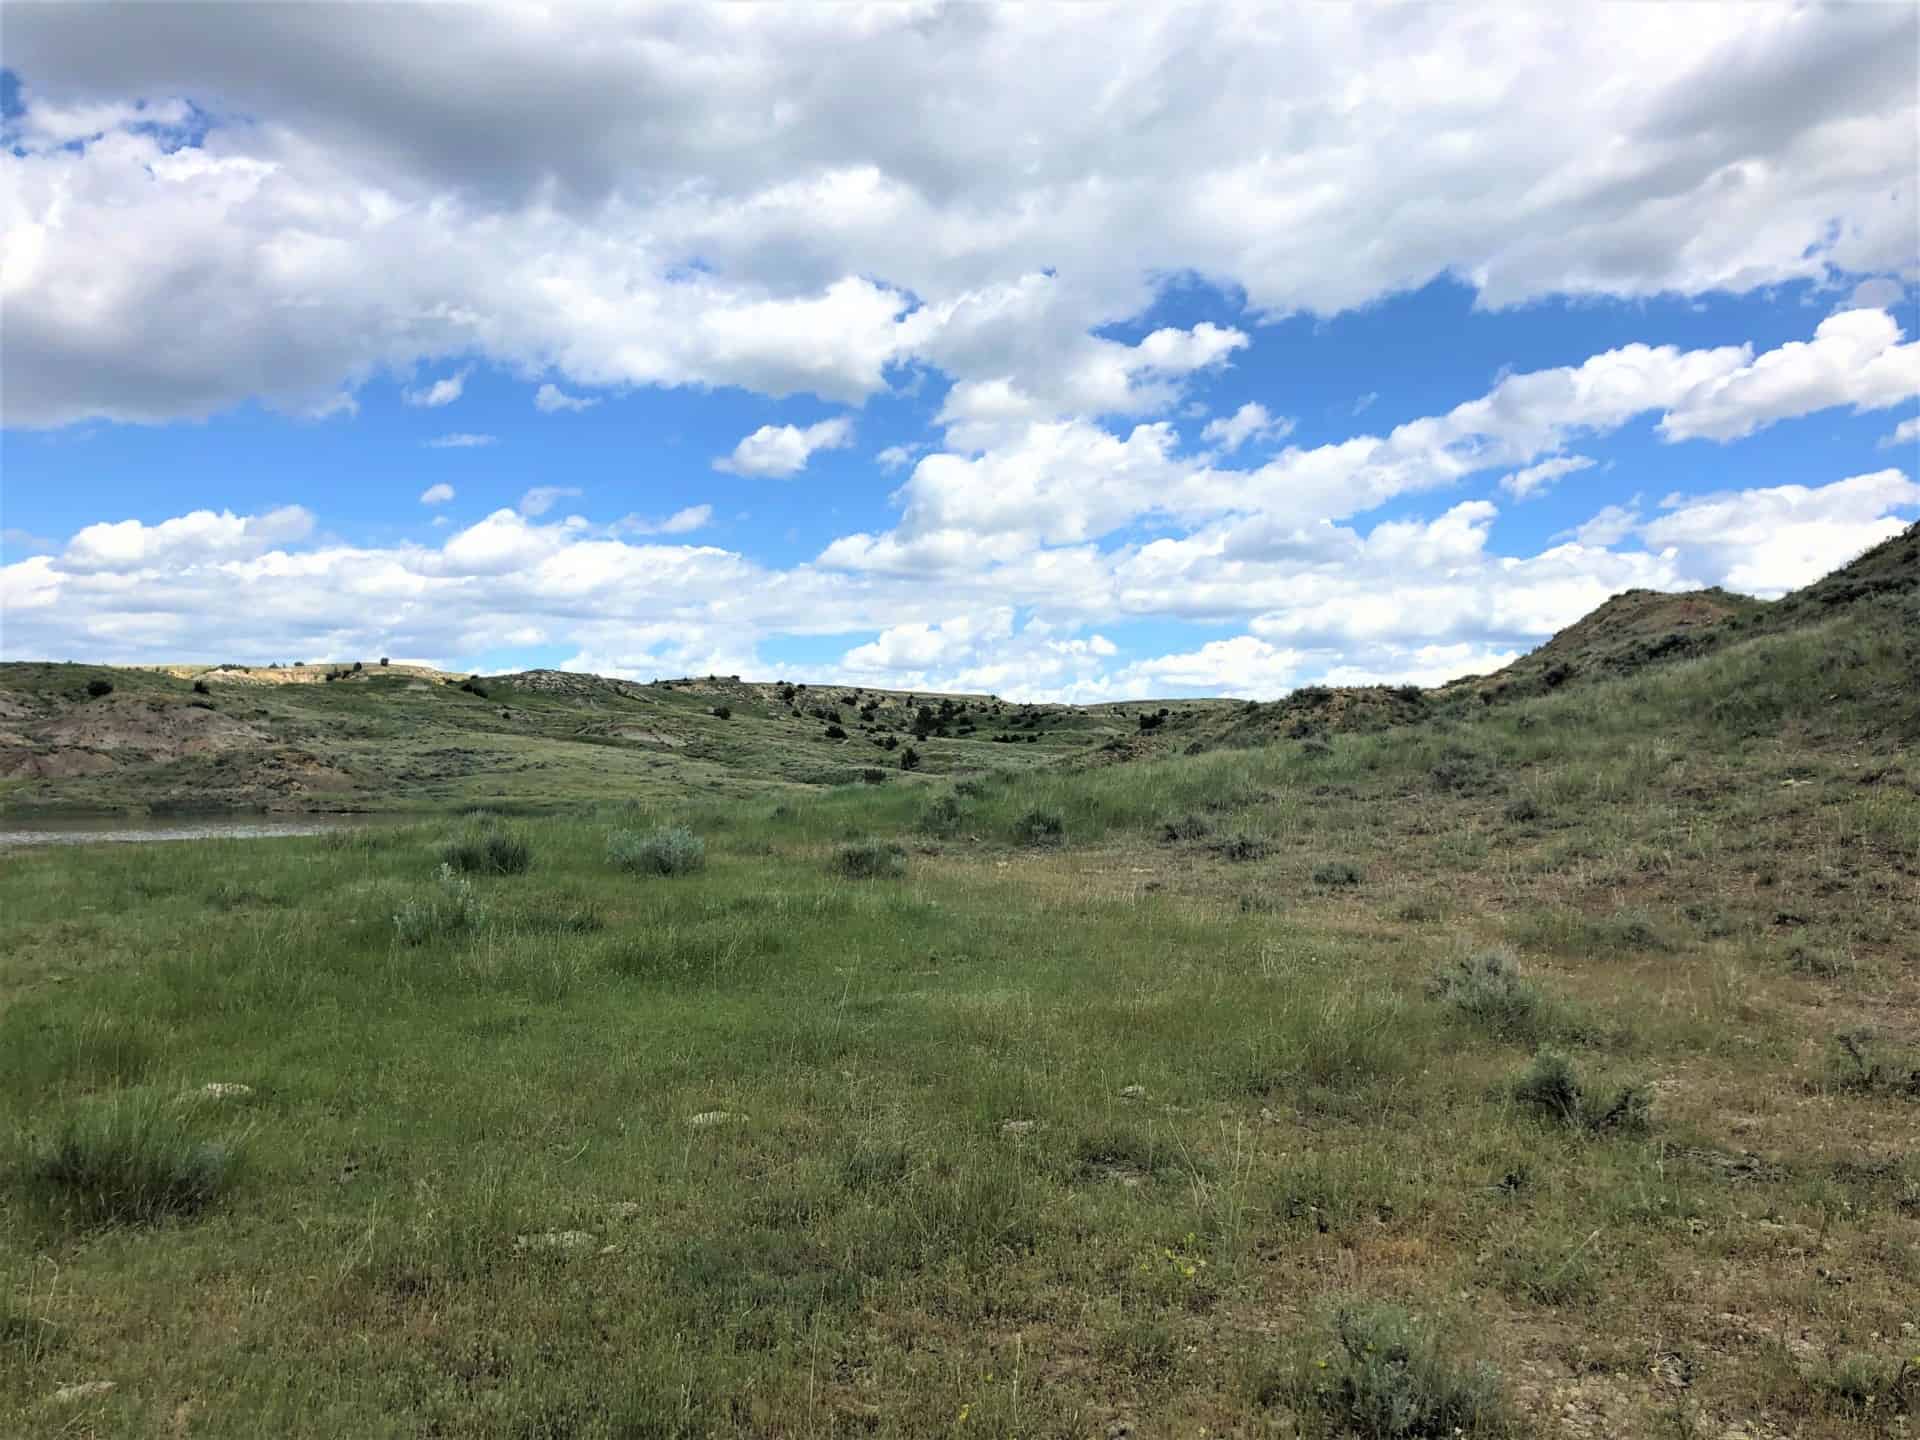 Grazing Land Montana Plum Coulee Fork Ranch